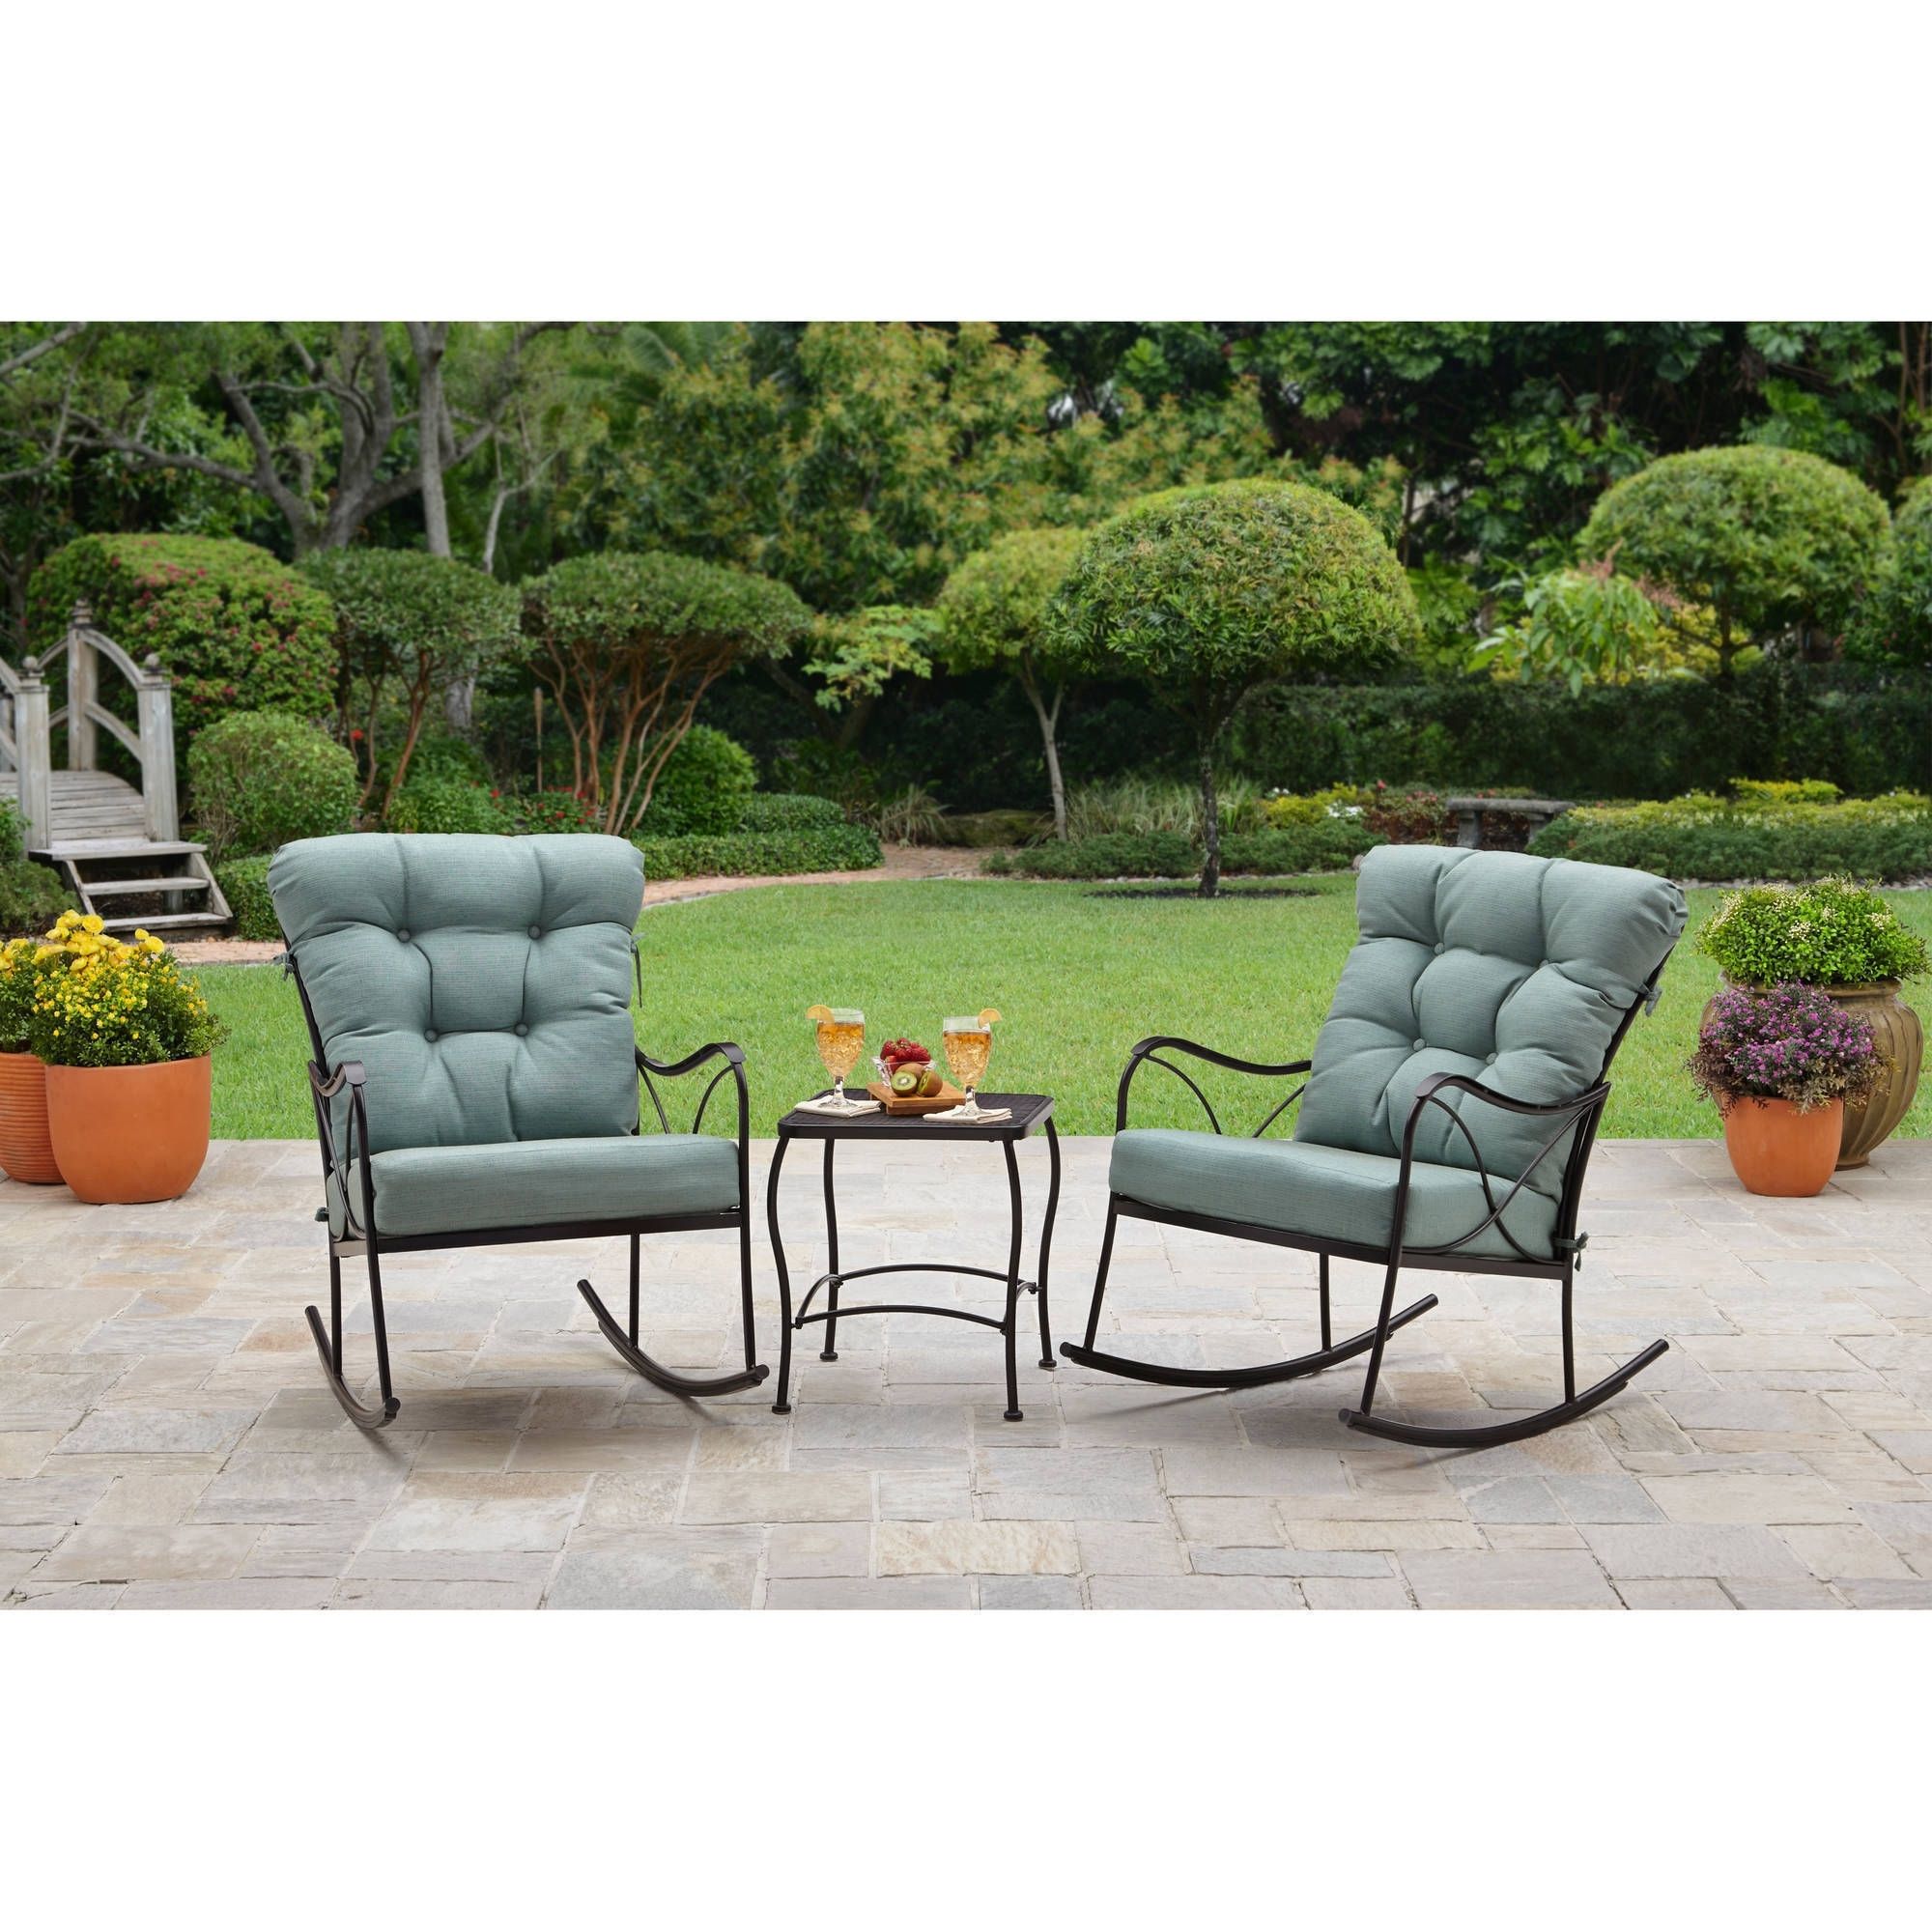 Better Homes And Gardens Seacliff 3 Piece Rocking Chair Bistro Set Pertaining To 2017 Patio Rocking Chairs Sets (View 9 of 15)